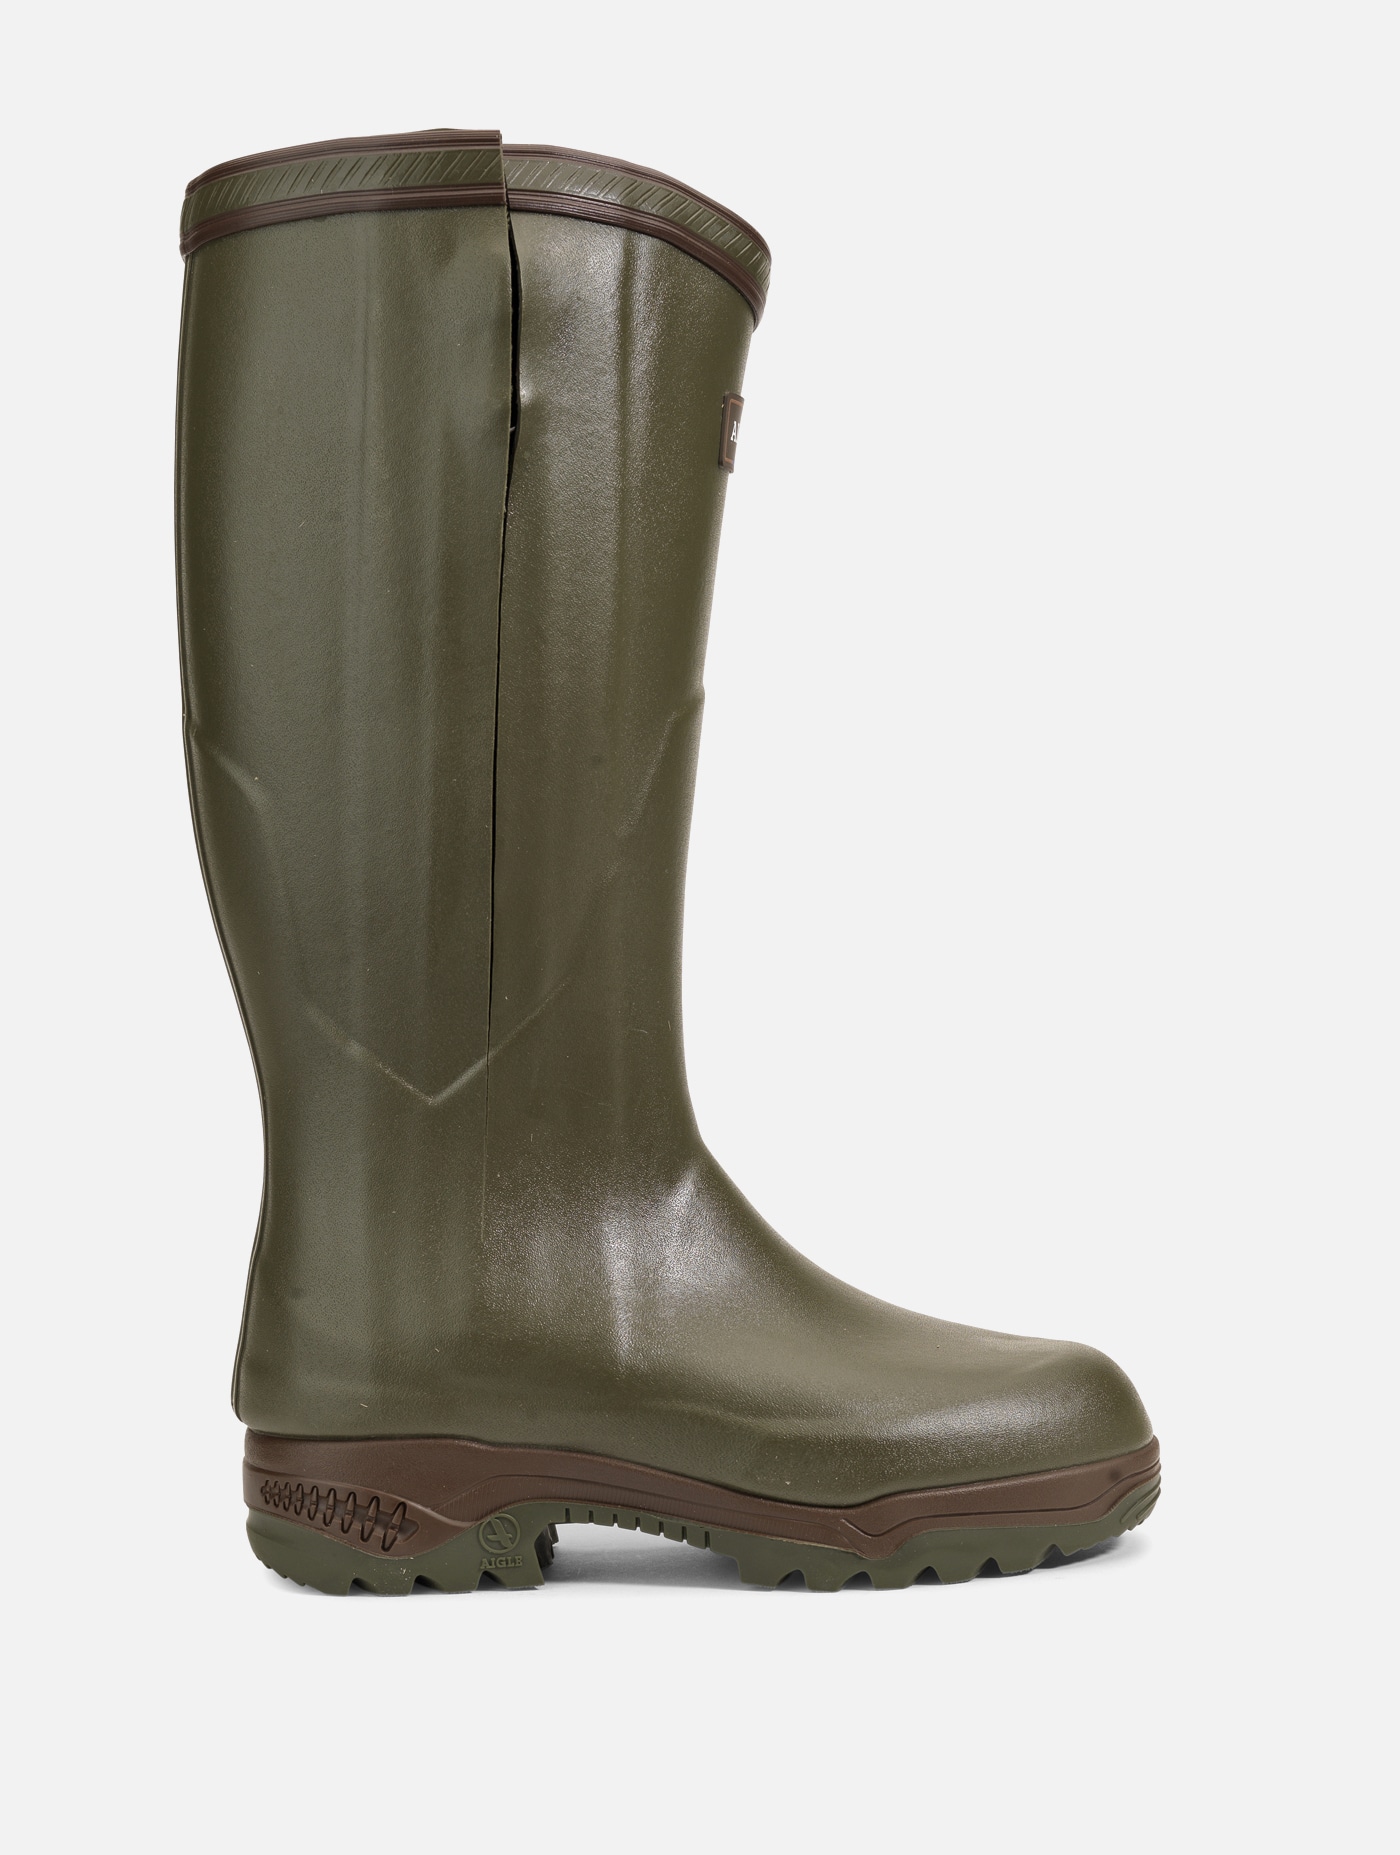 - hunting boots - Parcours® 2 iso open | AIGLE